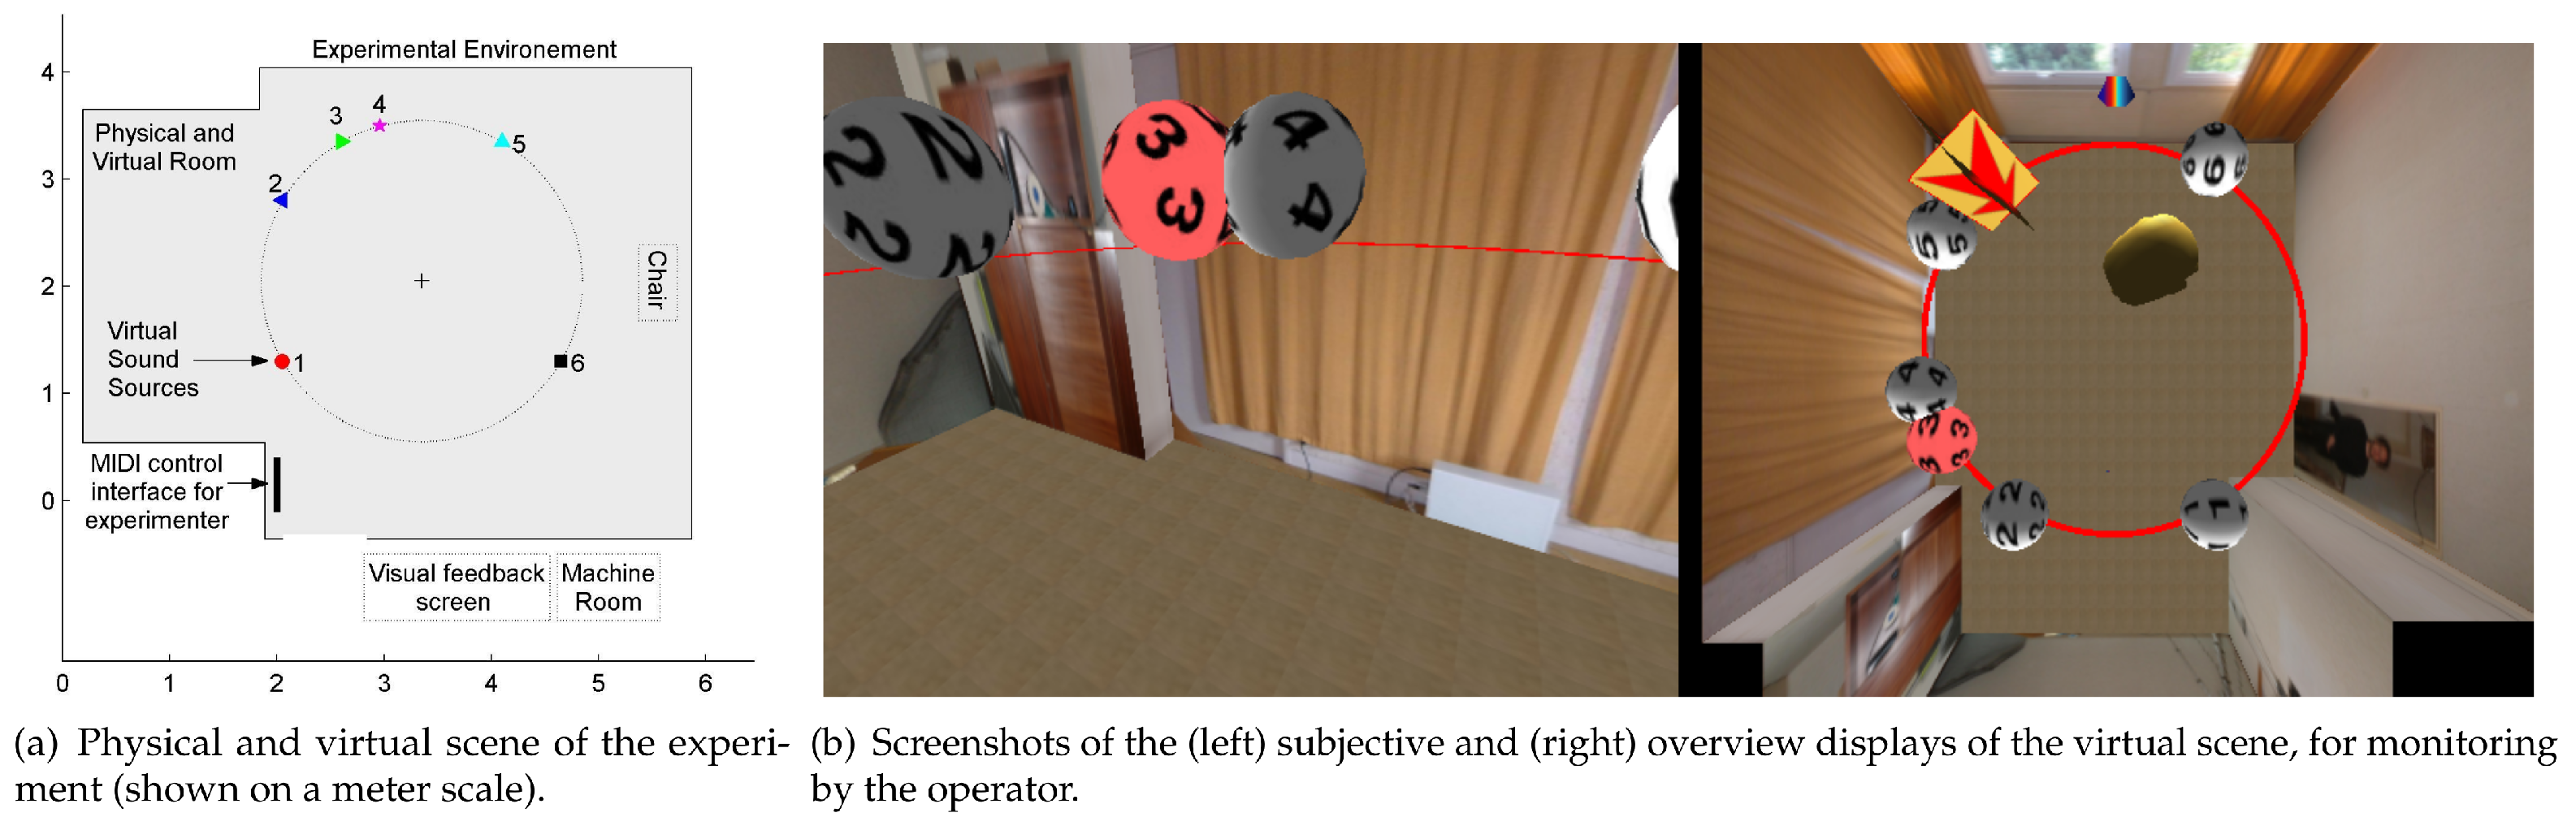 Sensors | Free Full-Text | Spatial Knowledge via Auditory Information for  Blind Individuals: Spatial Cognition Studies and the Use of Audio-VR